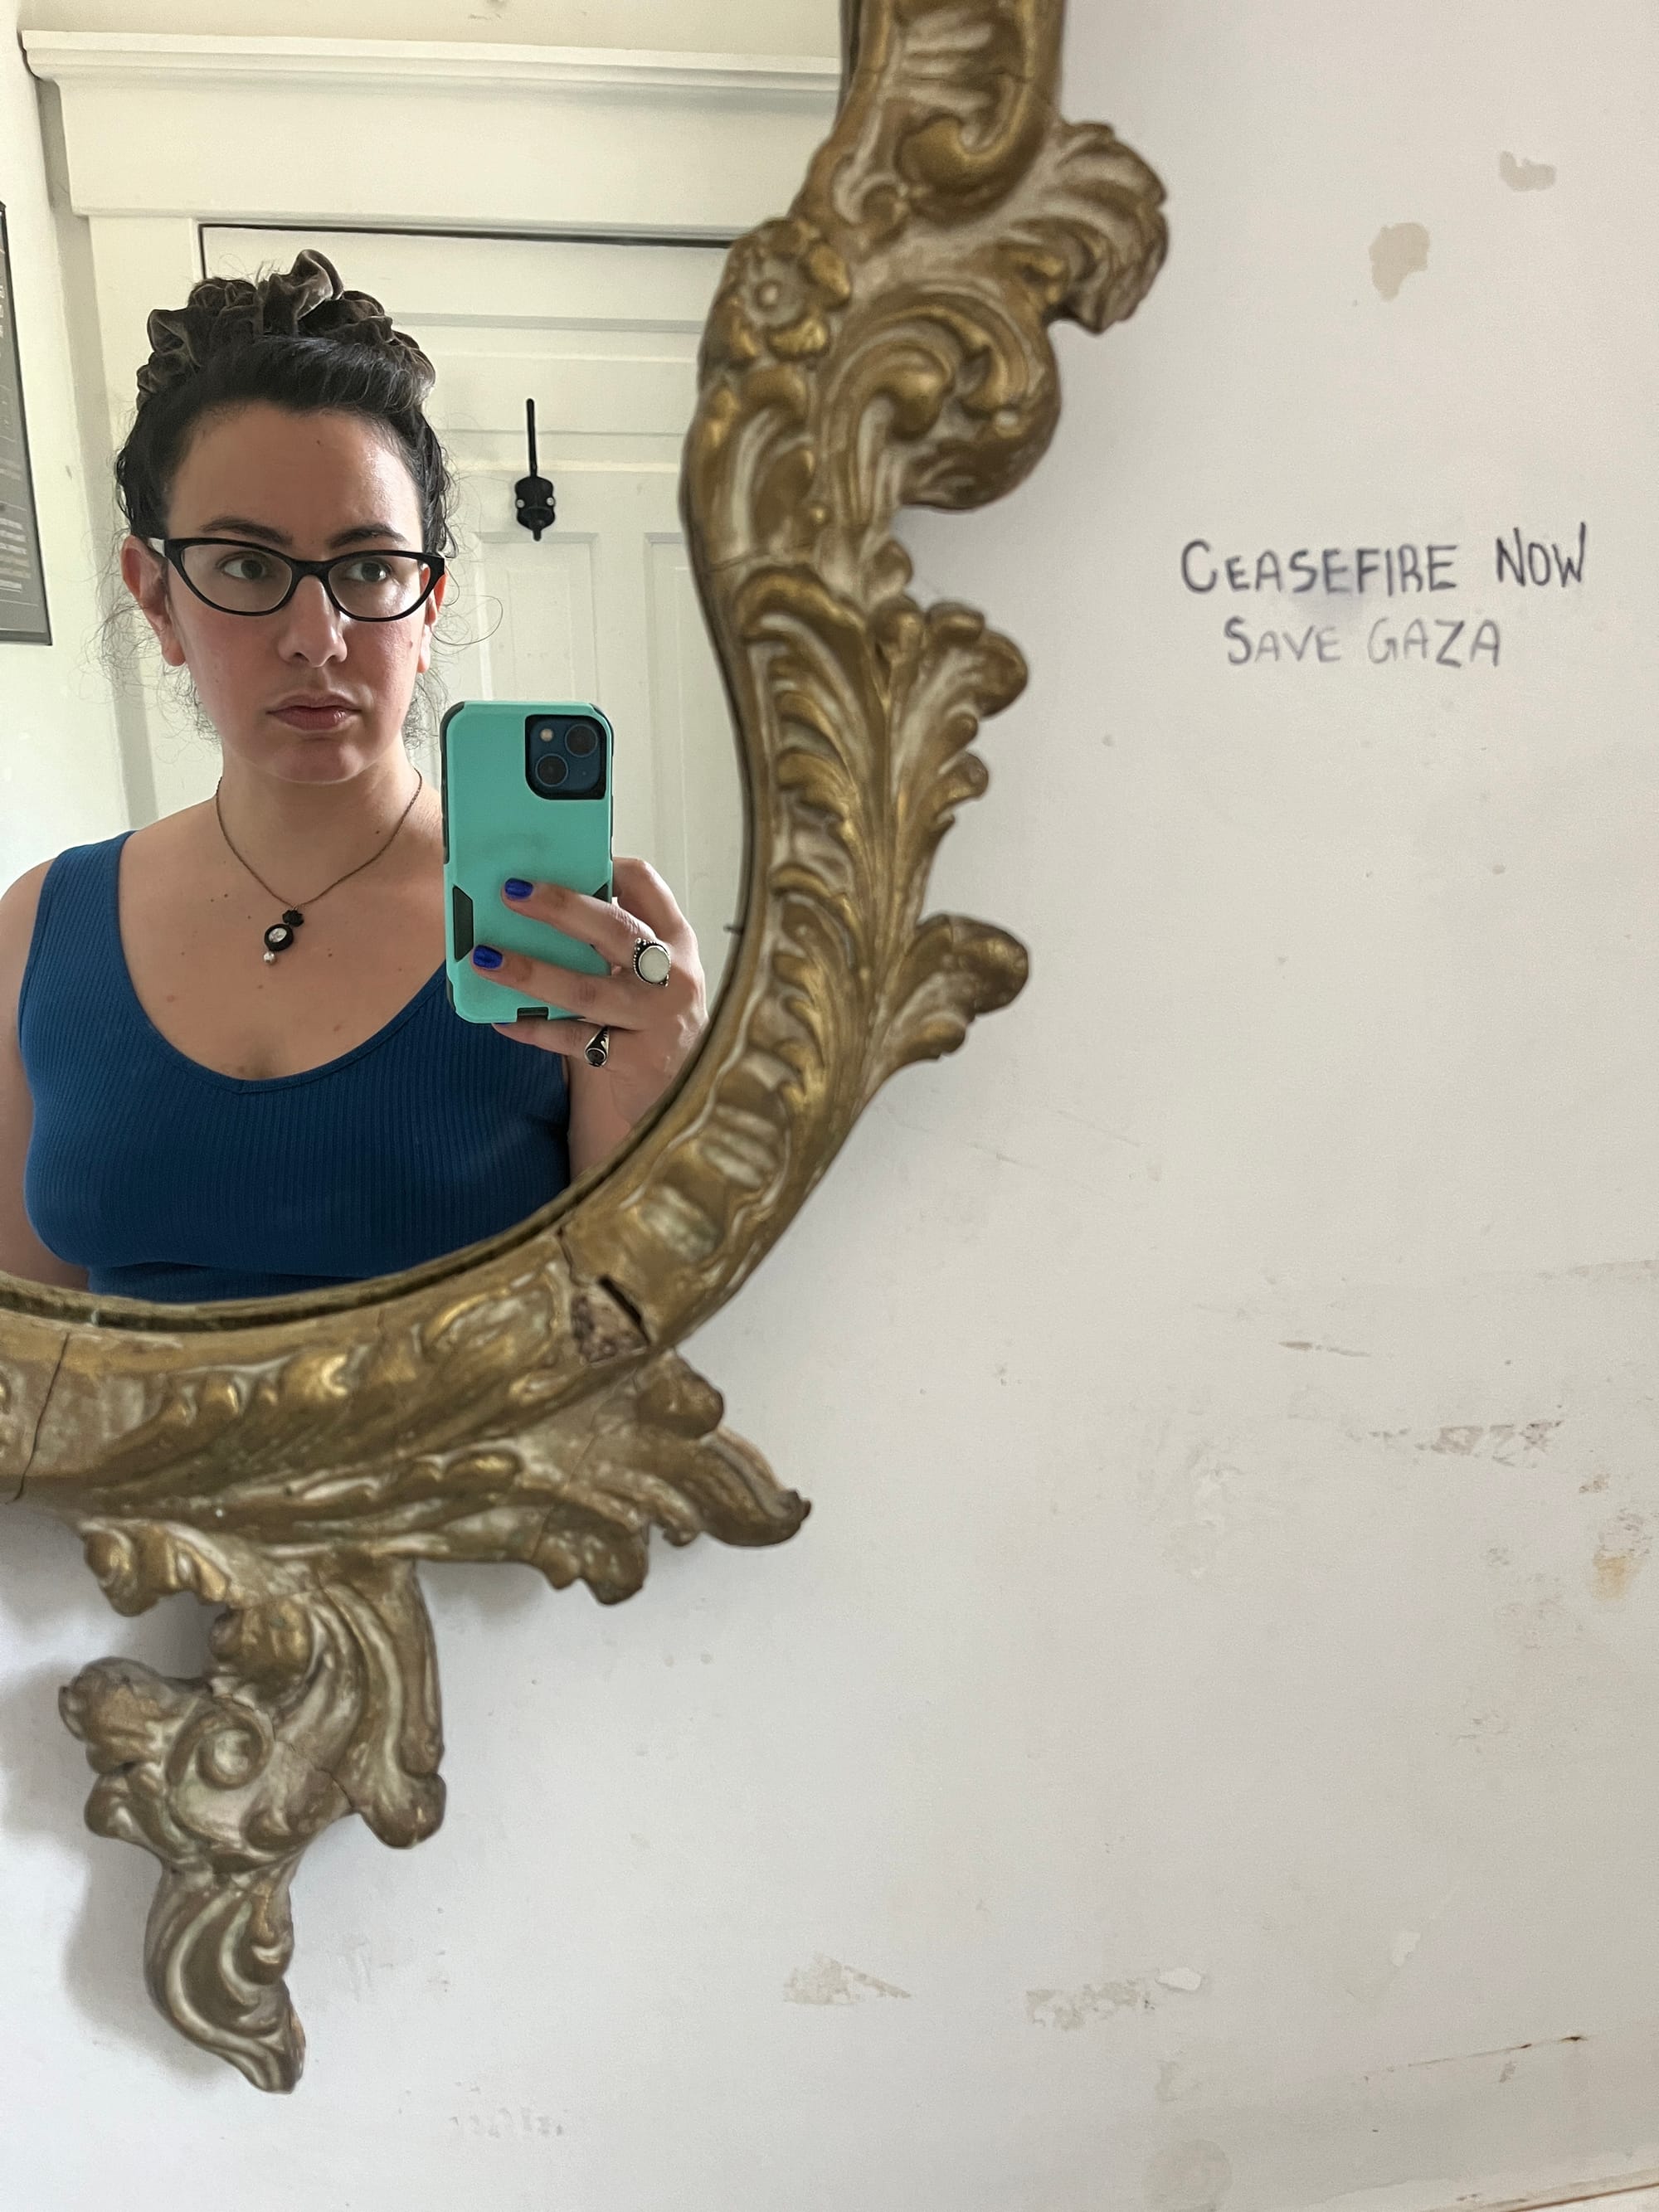 Mirror-selfie taken from the bust up in a partially visible gloriously ornate gilt mirror frame, next to which someone has scribbled “Ceasefire Now, Save Gaza”